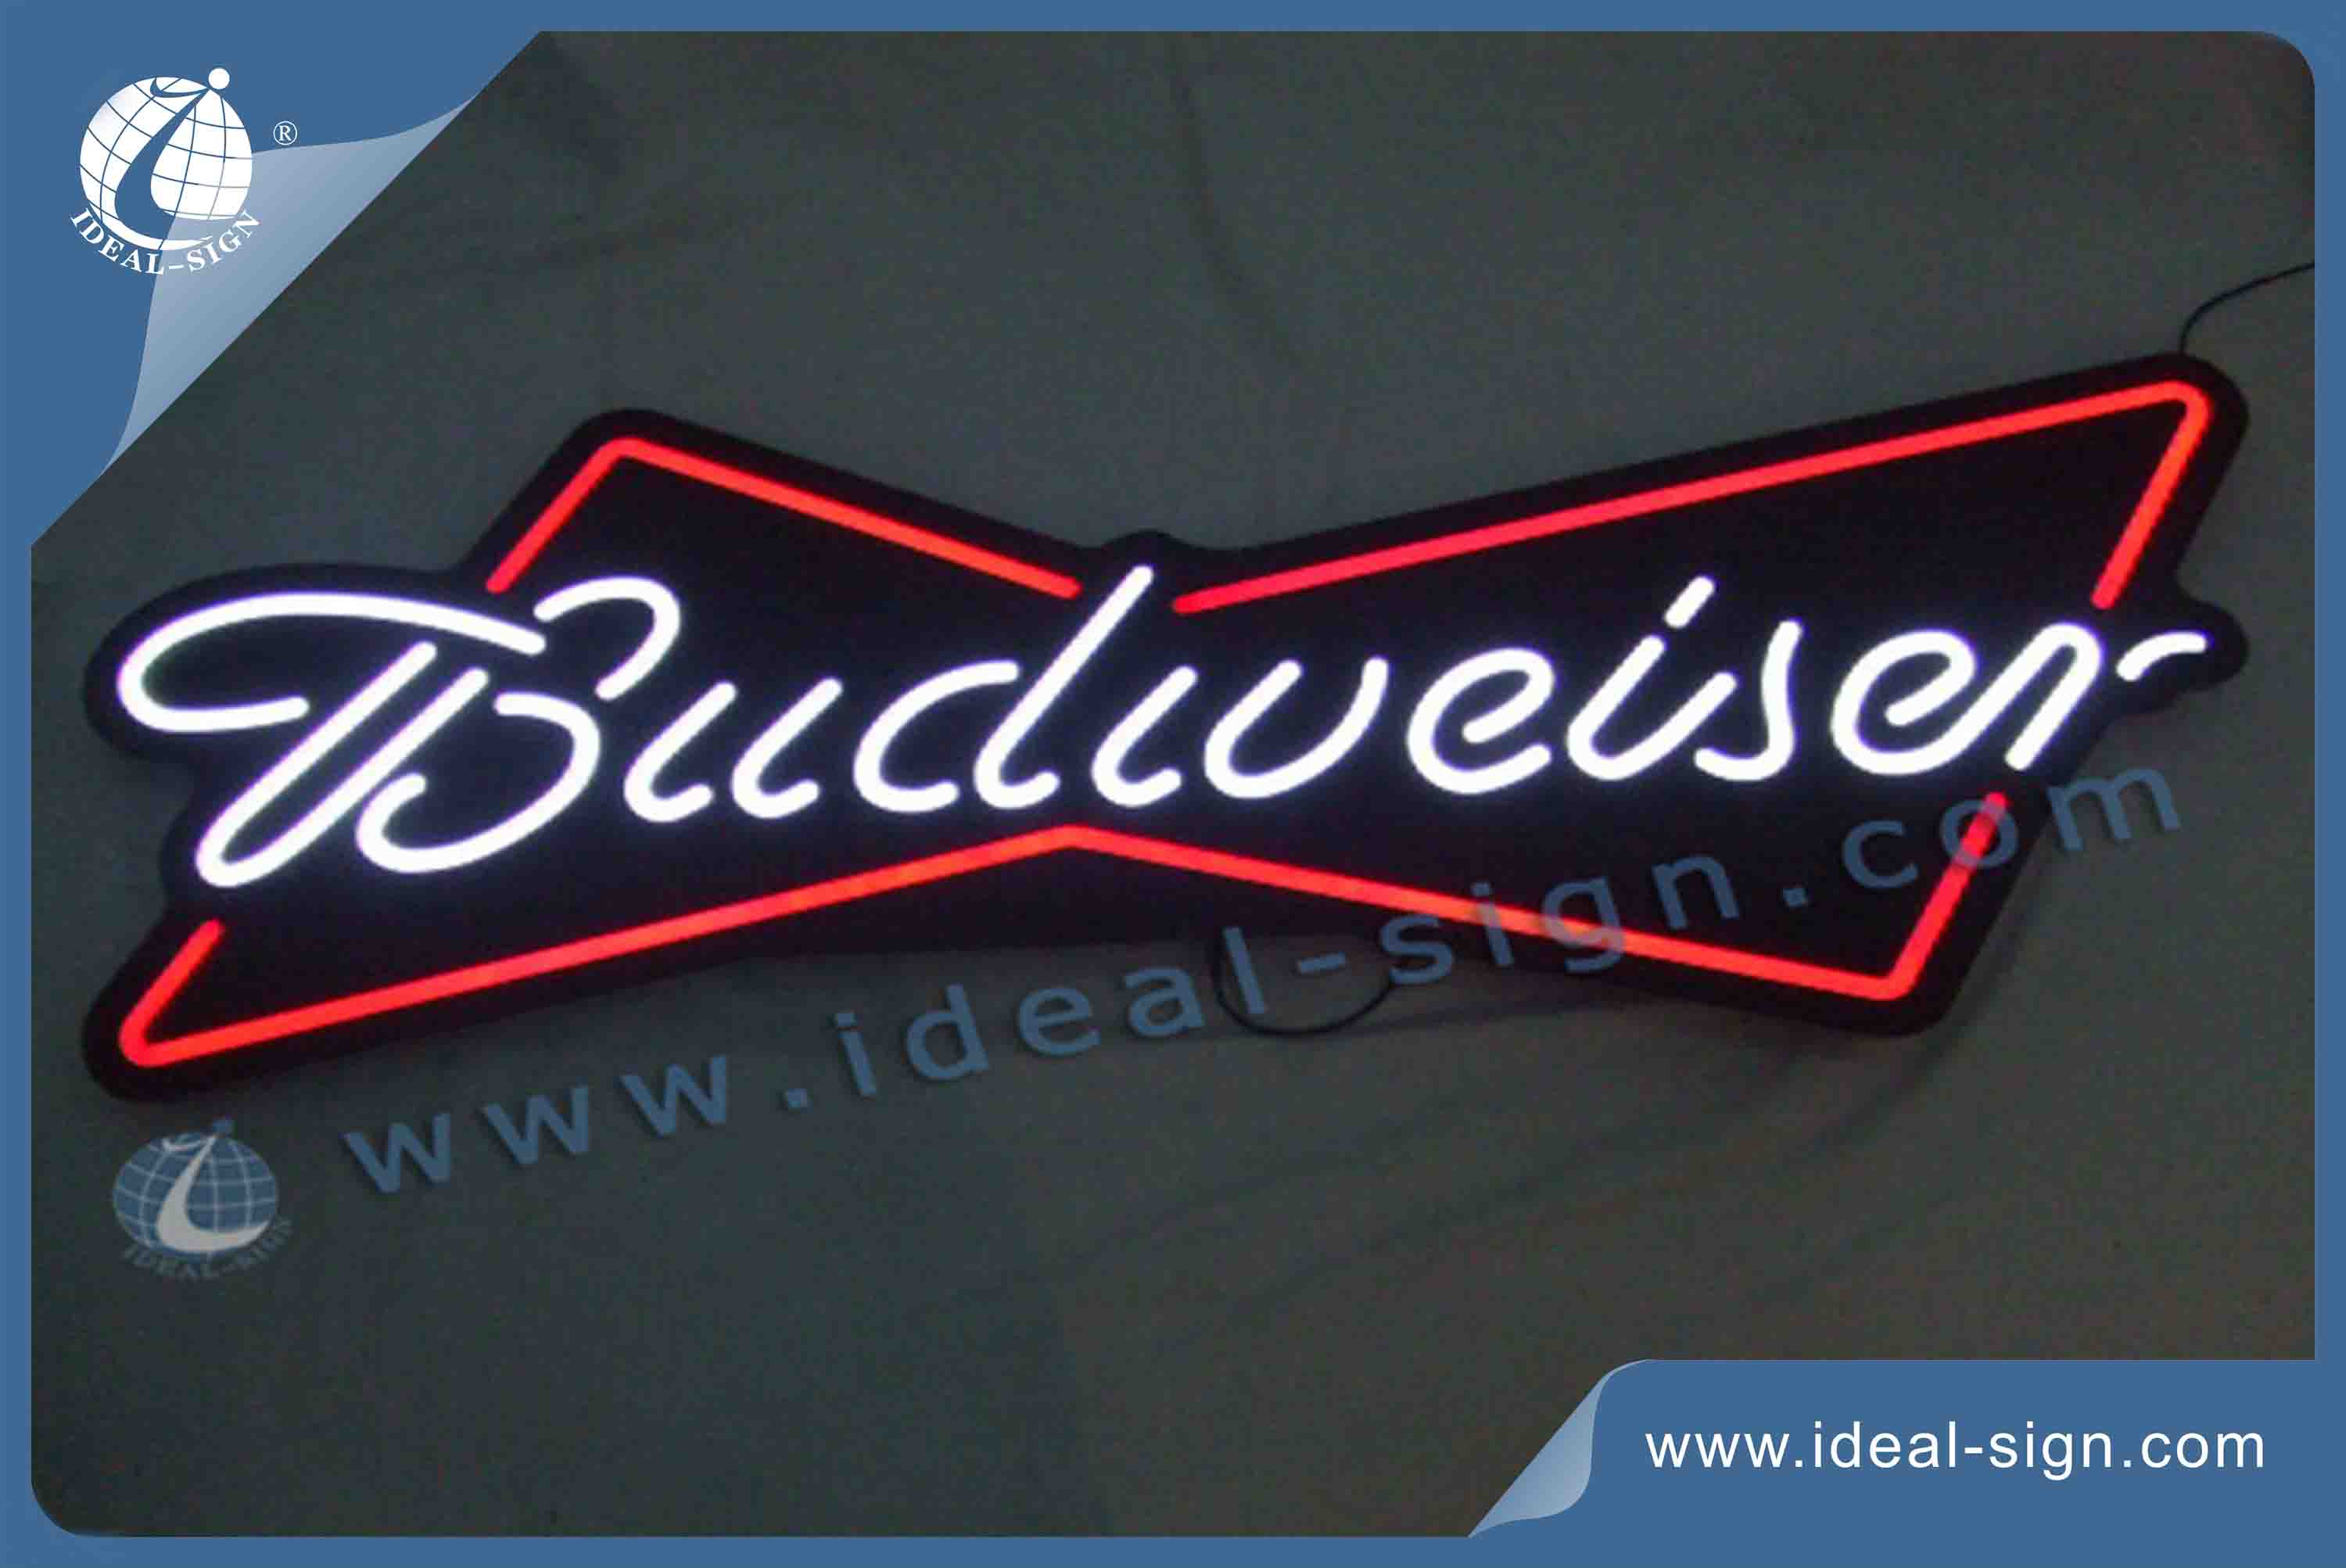 coca cola led sign
custom led neon sign
custom led sign
custom lighted business signs
led neon signs for sale
led neon signs wholesale
custom outdoor neon signs
bar open neon sign
neon advertising signs
neon open sign for sale